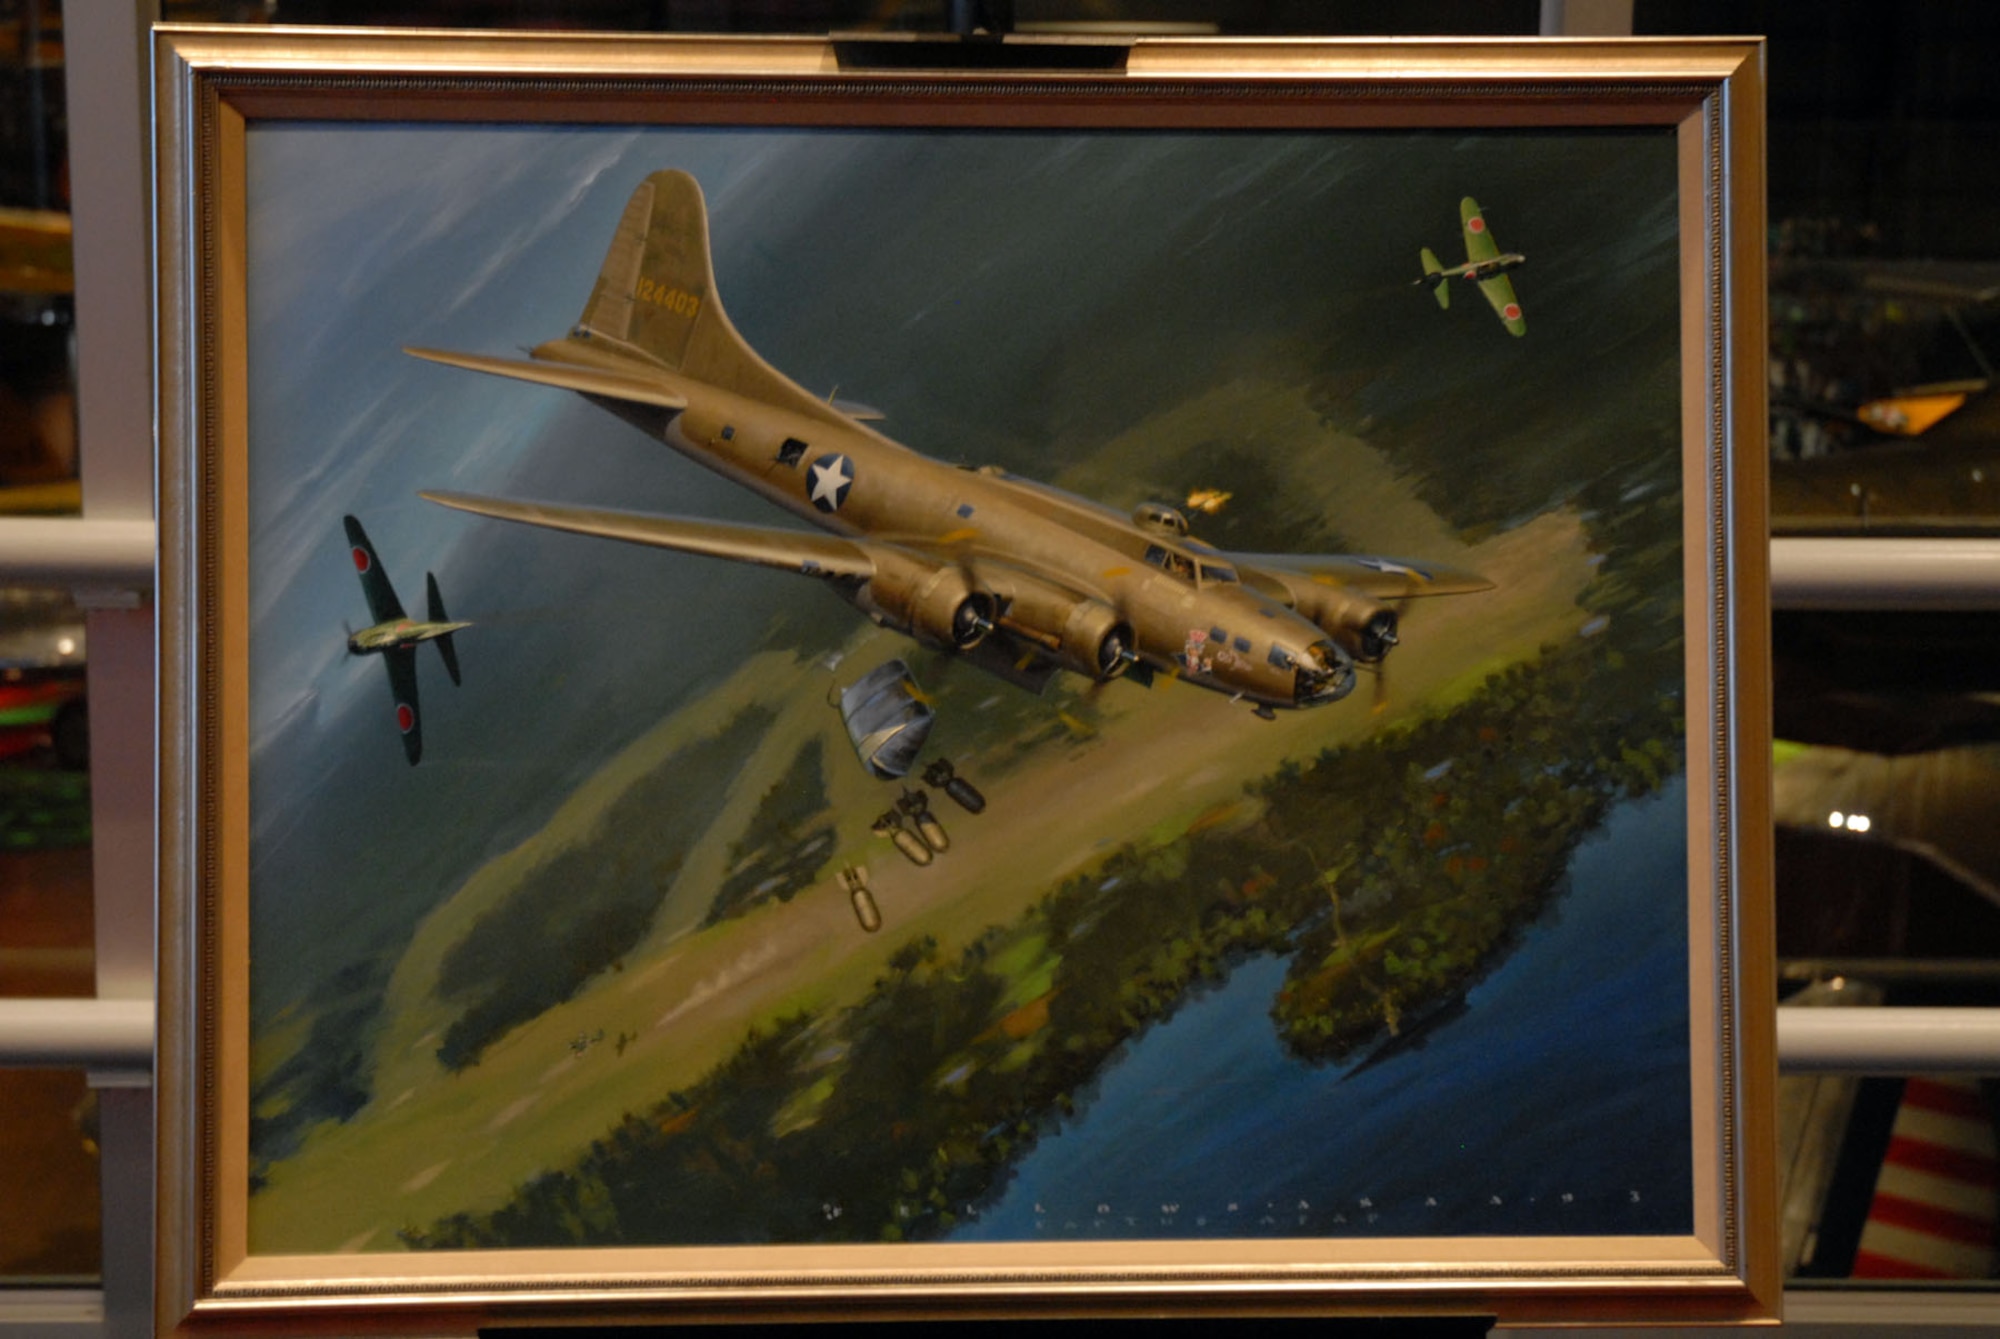 DAYTON, Ohio - A close up of "The Old Man's Ordeal" by Jack Fellows. Jeanne Greenlee donated this photo to the National Museum of the U.S. AIr Force after the artist indicated it was her father's wish it go to a museum. Greenlee's father was the bombardier in the B-17 pictured and assisted the artist in details of the scene. (U.S. Air Force photo)